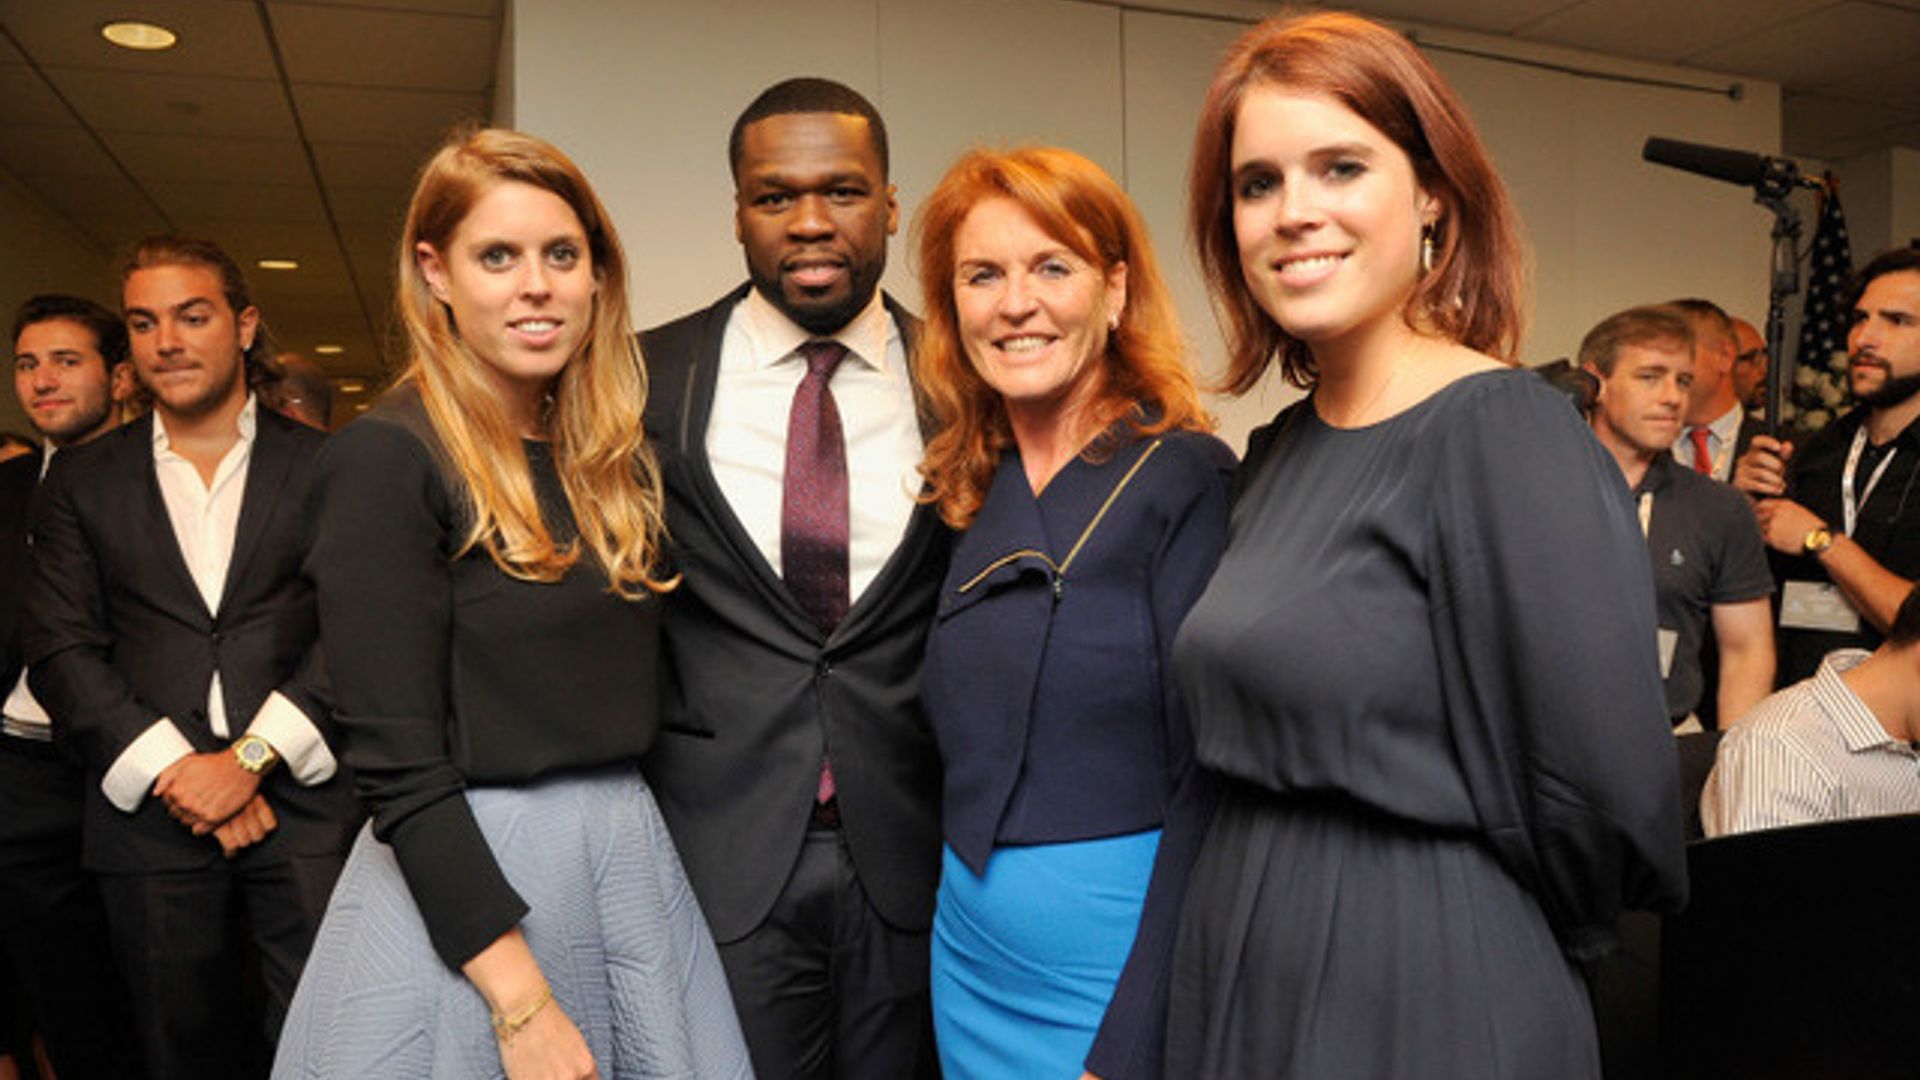 Princesses Beatrice, Eugenie hang with 50 Cent and more royal news